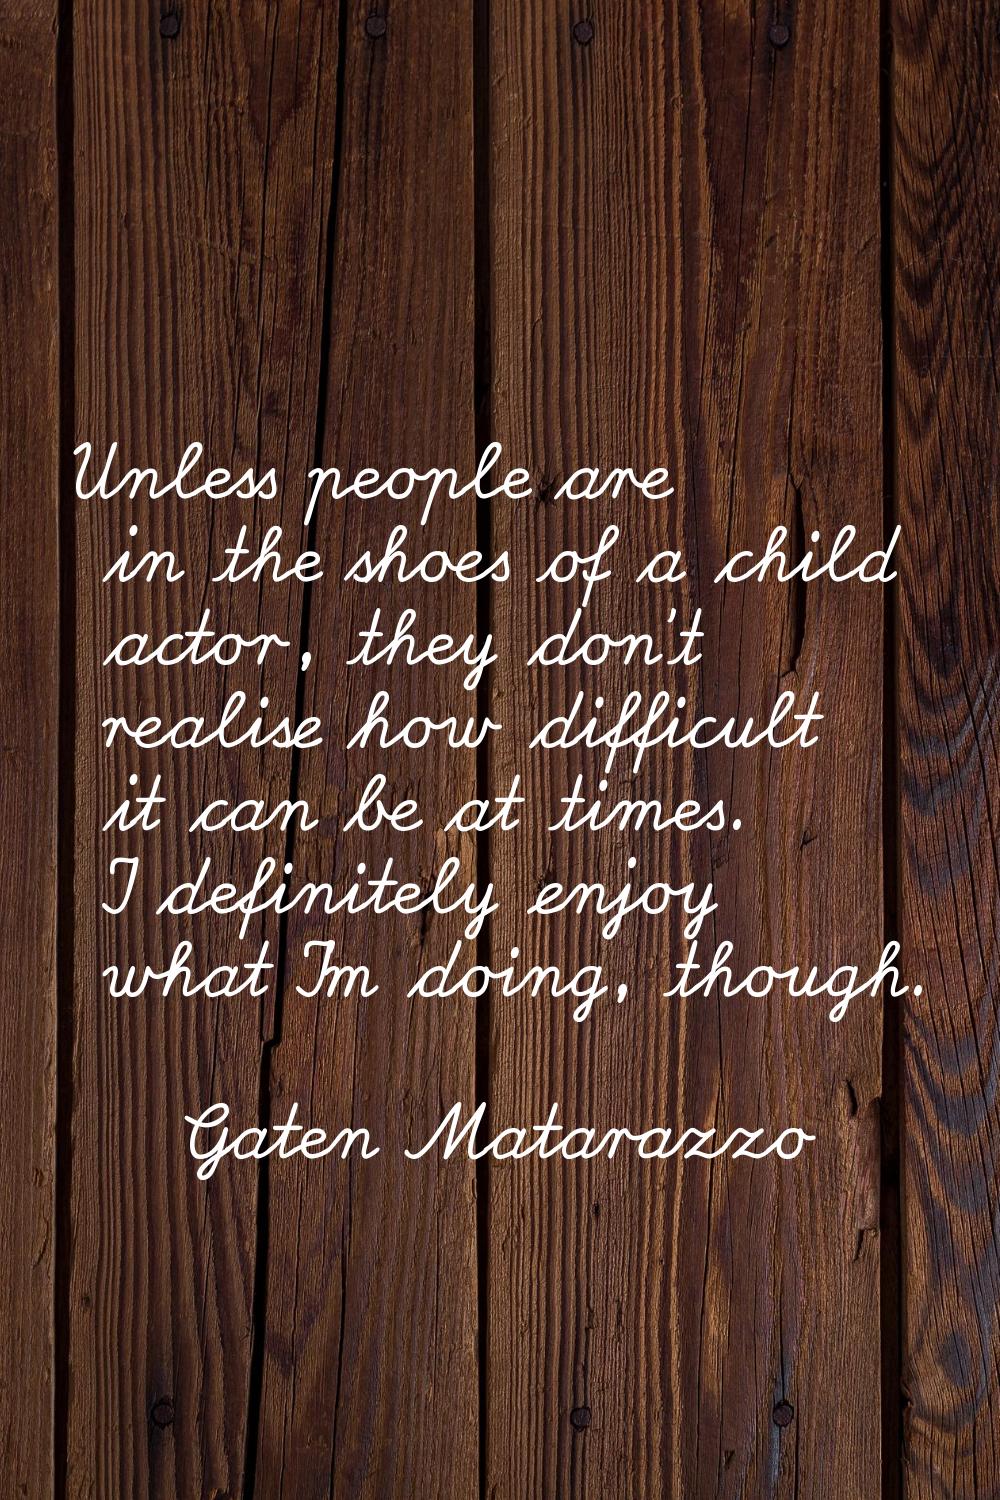 Unless people are in the shoes of a child actor, they don't realise how difficult it can be at time